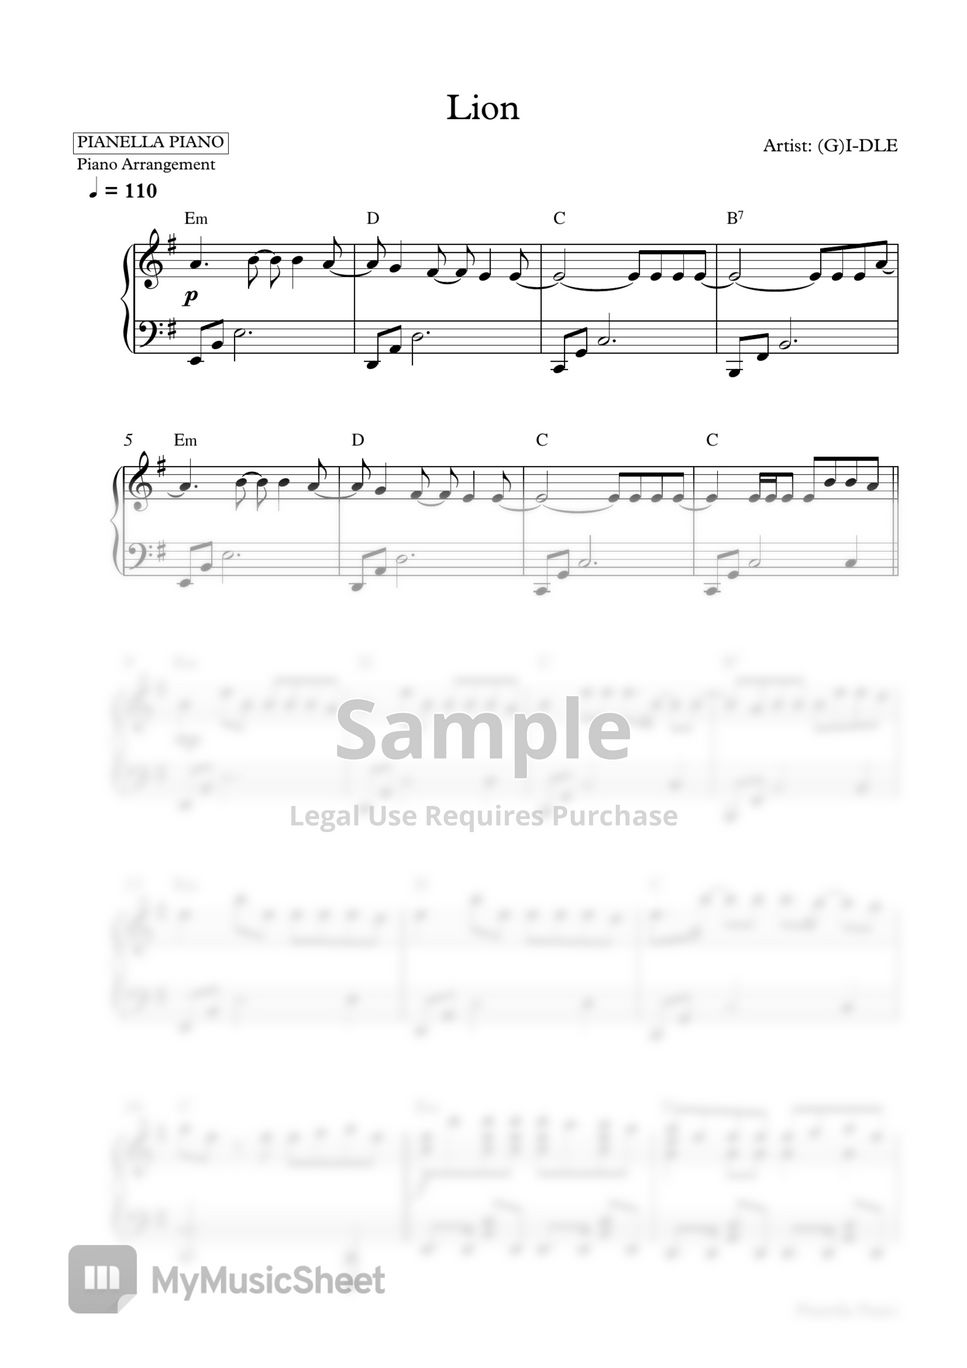 (G)I-DLE - Lion (Piano Sheet) by Pianella Piano